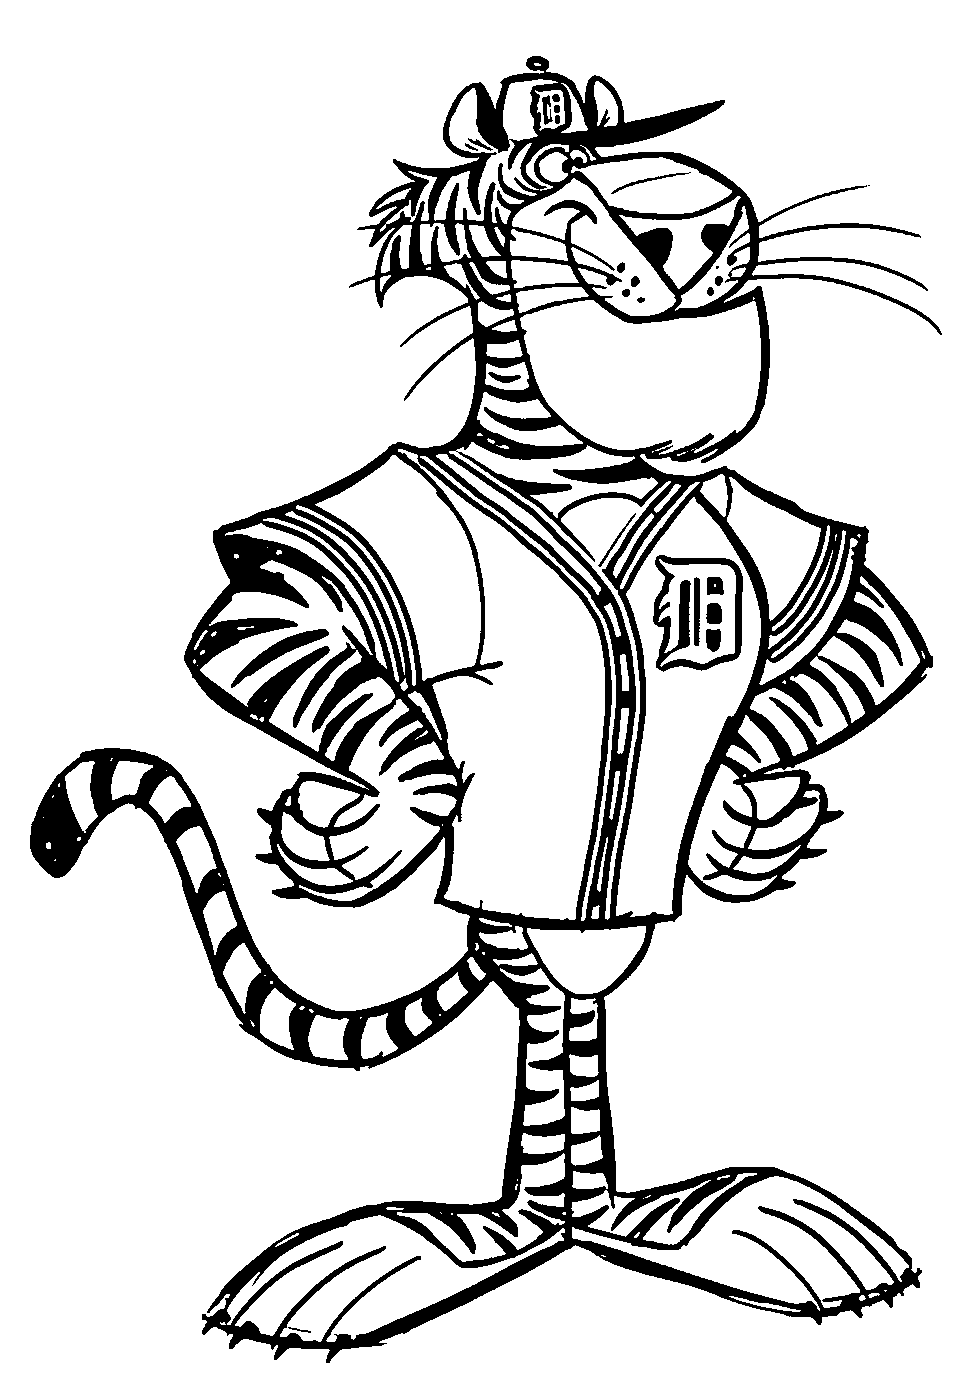 Download Detroit Tigers Coloring Pages - Coloring Home